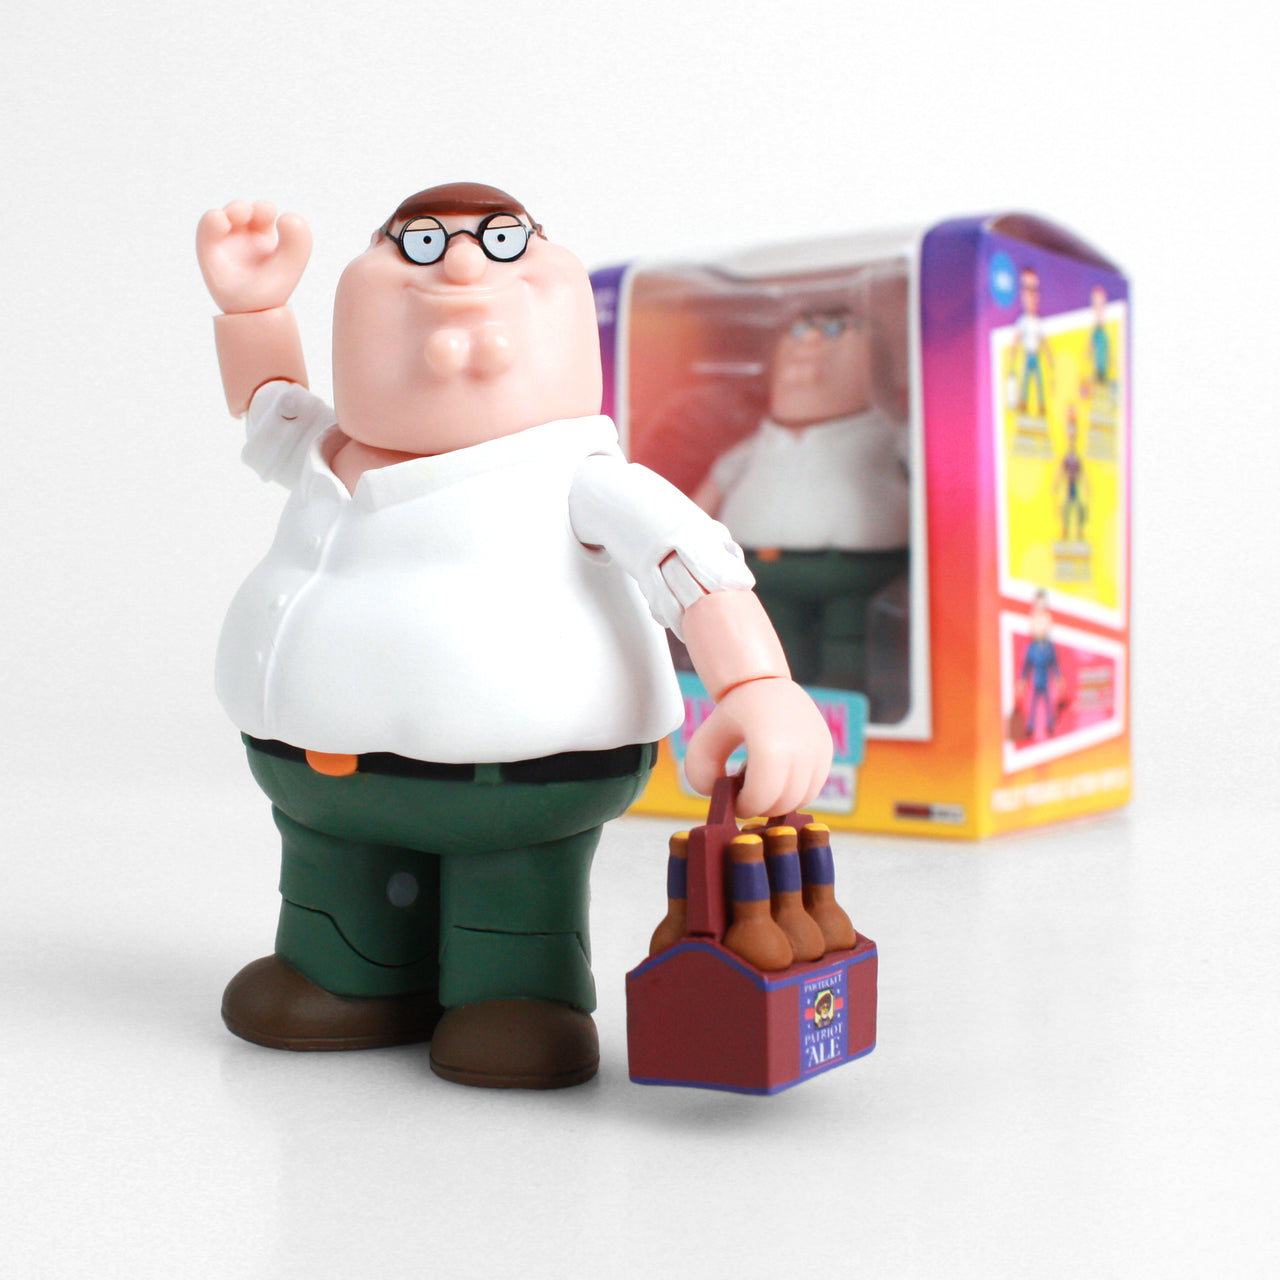 The Loyal Subjects - Family Guy Peter Griffin with 6 Pack of Ale